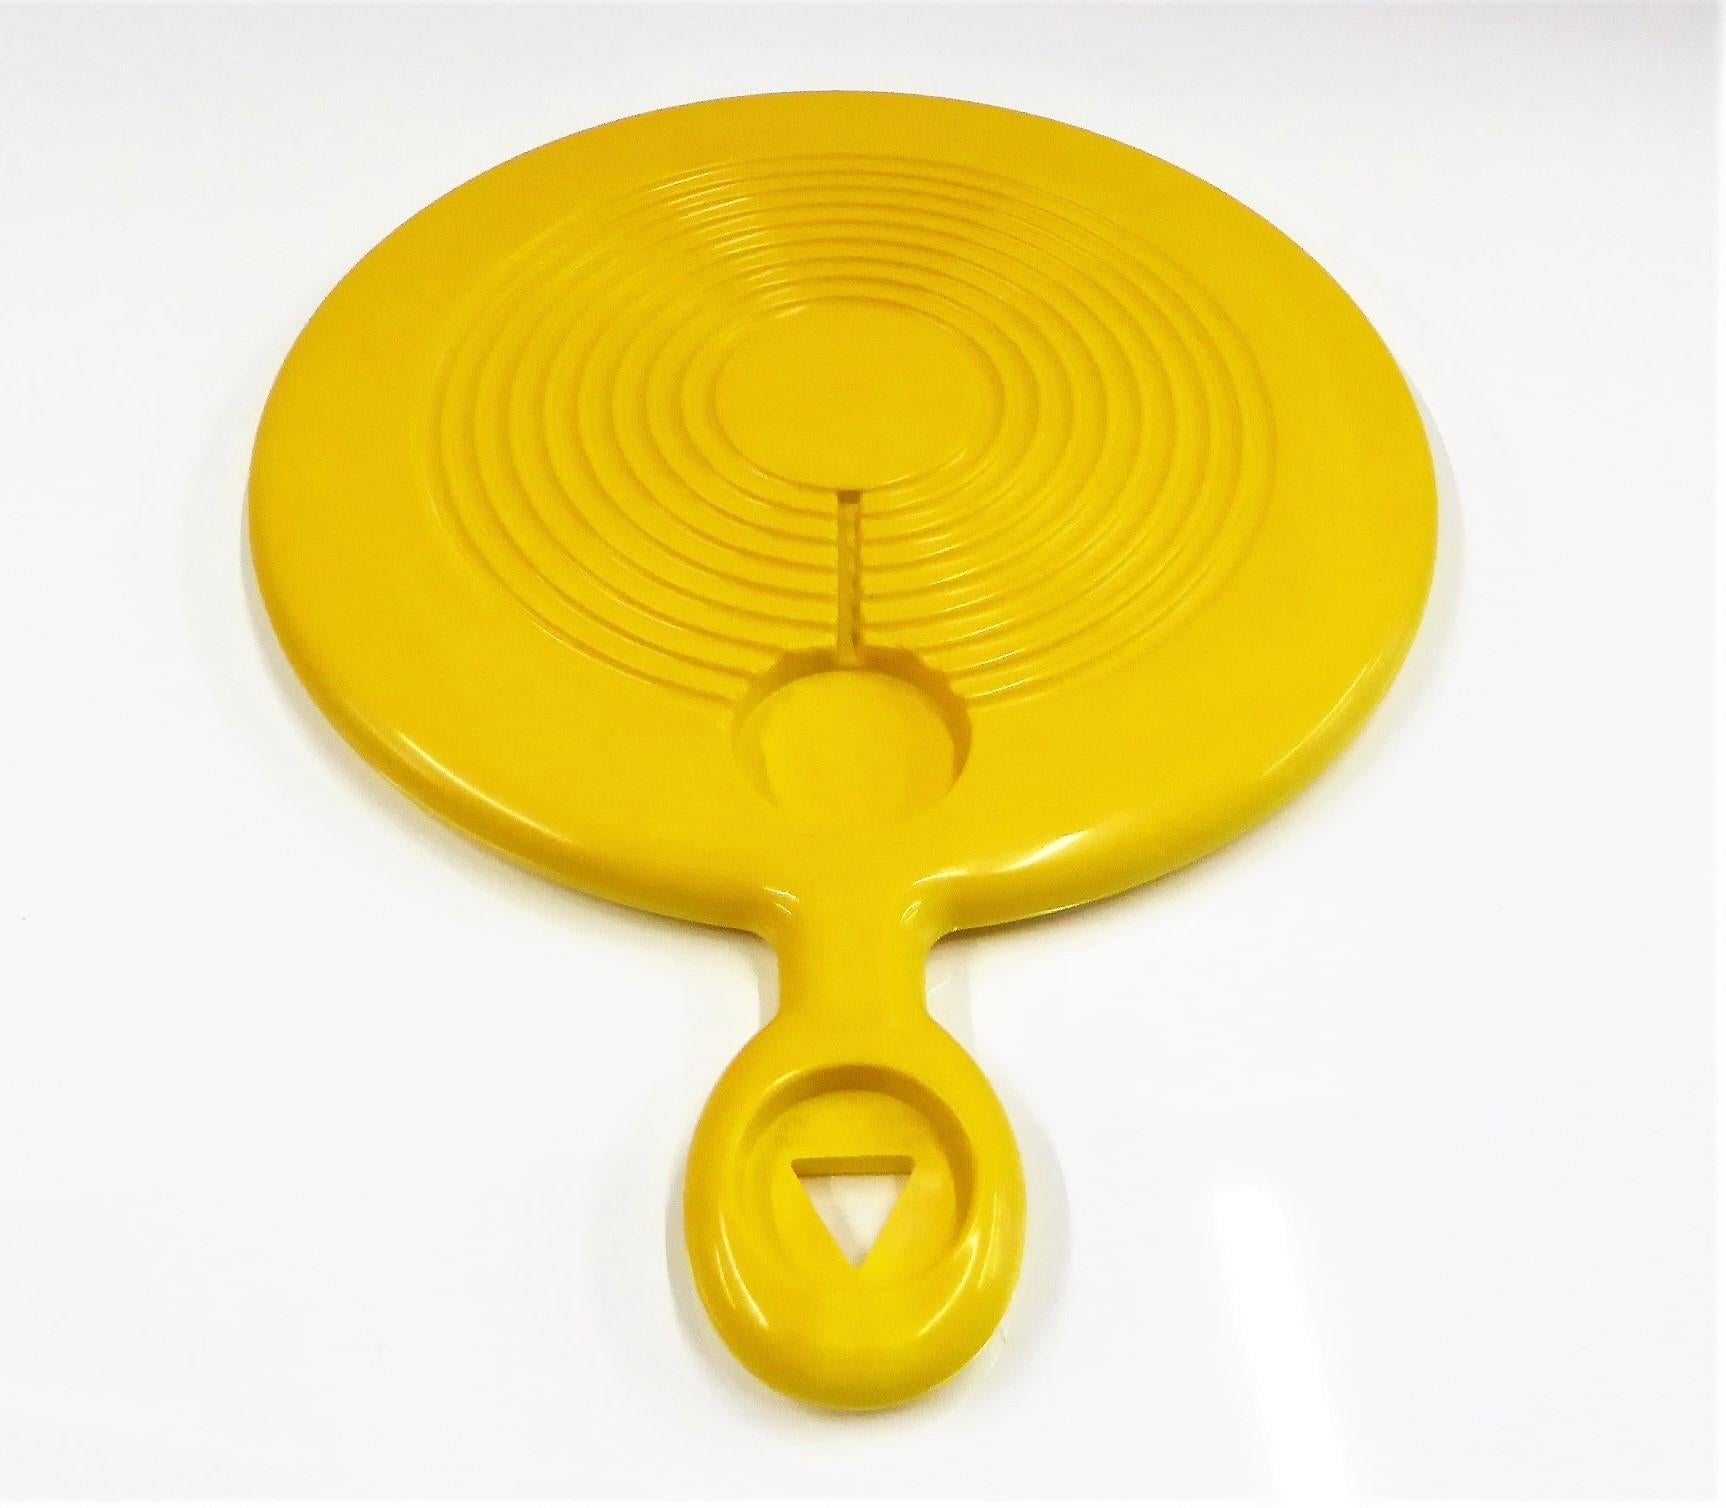 Designed in 1972, by Anna Castelli Ferrieri, co-founder of Kartell with her husband Guilio , in 1949, the Kartell 7003 is an ABS Plastic Cutting Board or Tagliere with one side grooved with a drain and the other side flat for bread, etc. Quite rare,